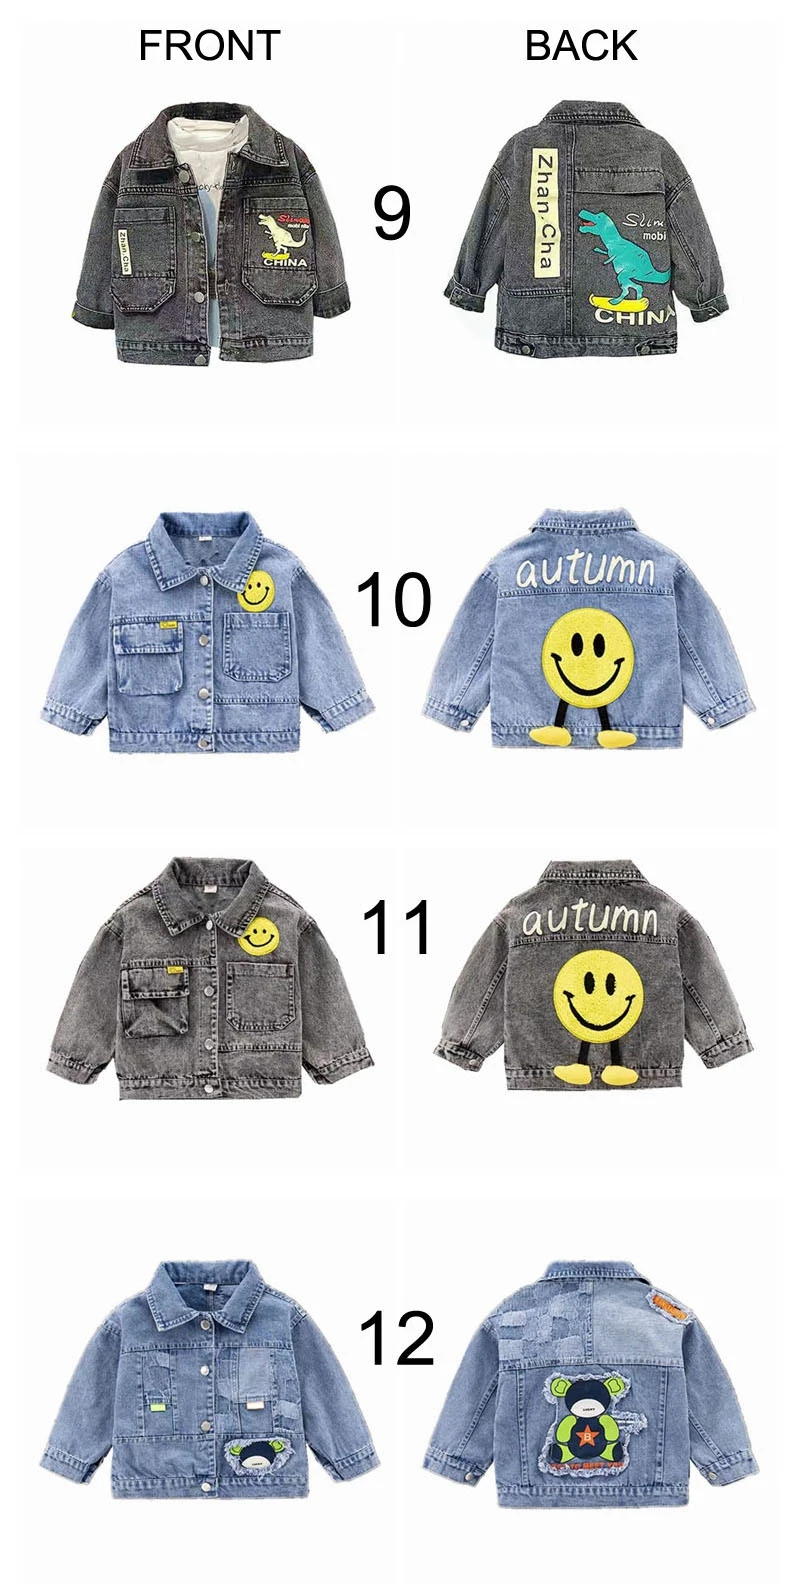 Spring Autumn Jacket New Arrival Clothing Baby Boys Coat Cartoon Printed  Flight Jacket Autumn Kids Outerwear Children Clothes 011111 From Smart_kid,  $49.24